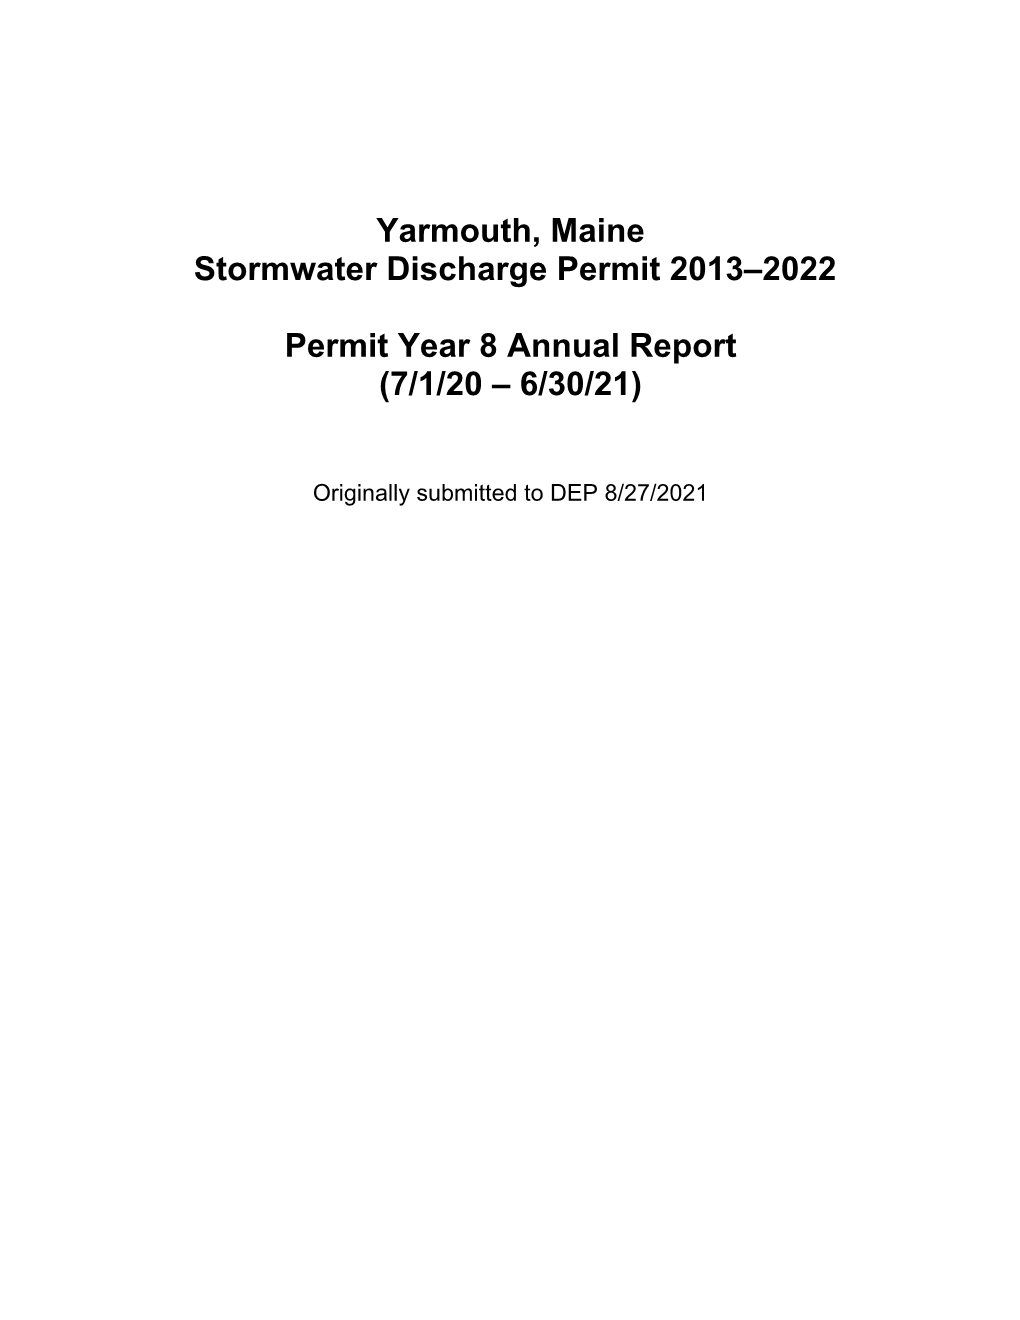 Yarmouth, Maine Stormwater Discharge Permit 2013–2022 Permit Year 8 Annual Report (7/1/20 – 6/30/21)